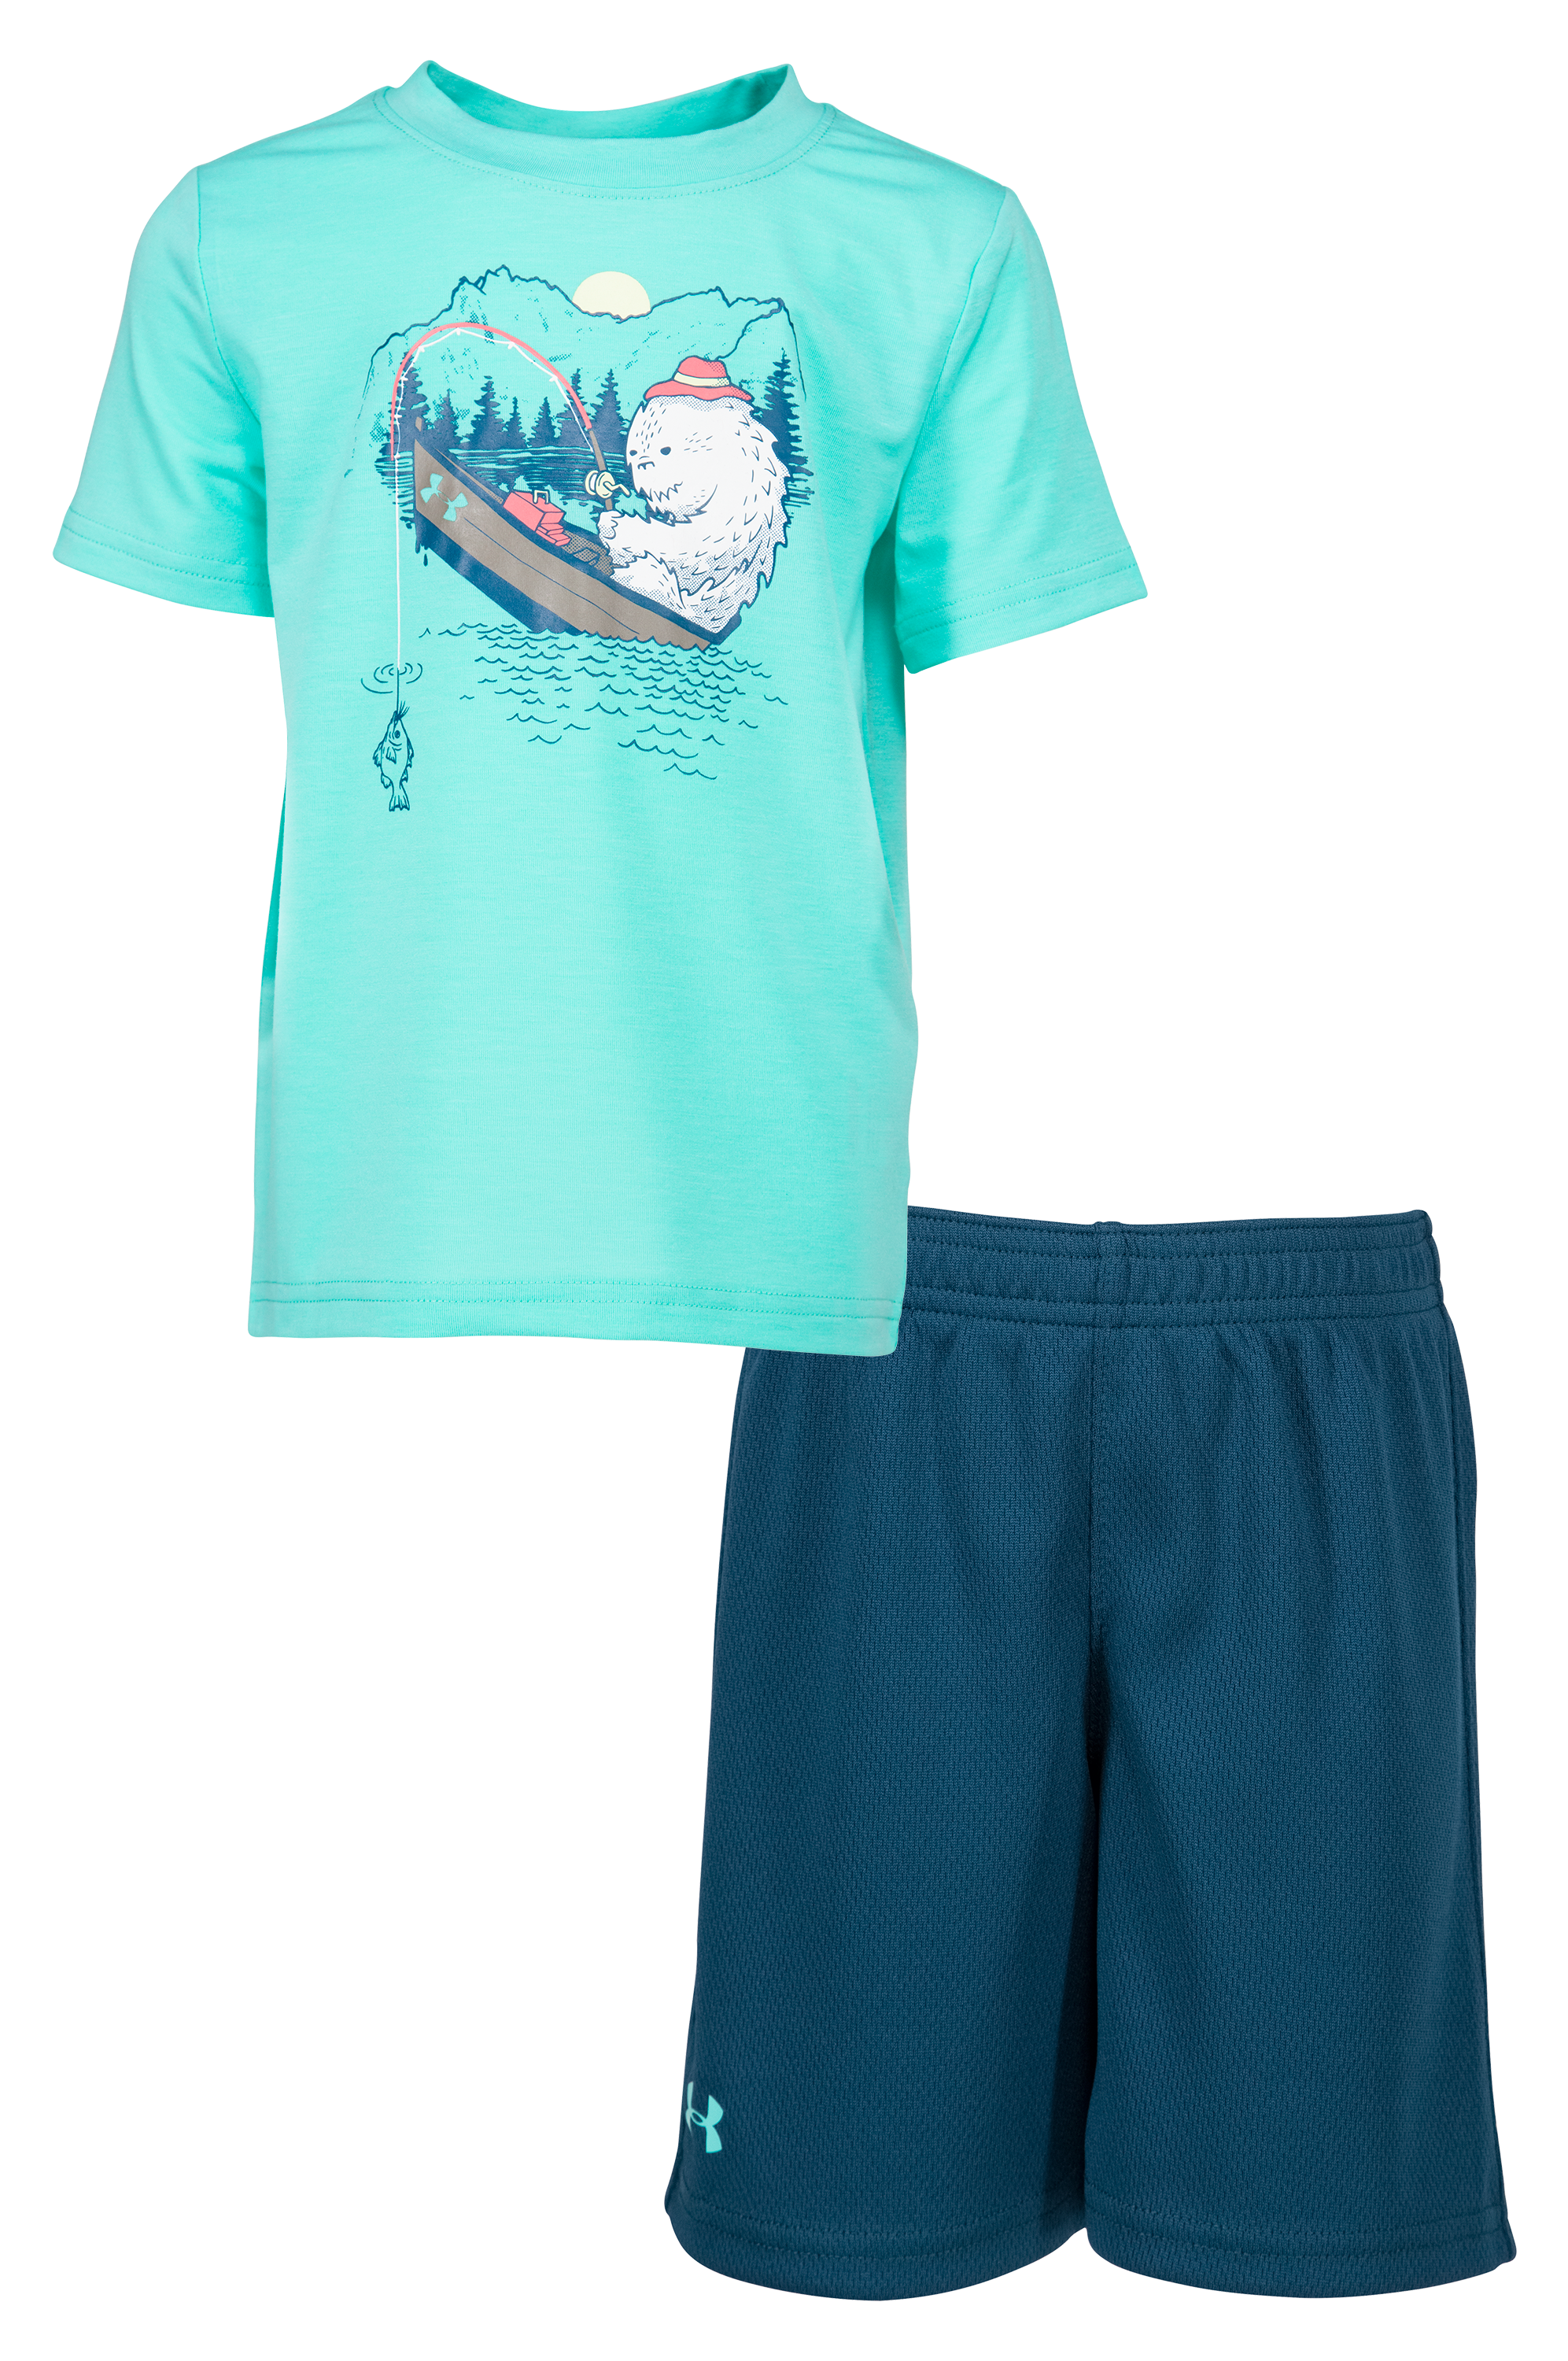 Under Armour Yeti Fishing Short-Sleeve T-Shirt and Shorts Set for Babies,  Toddlers, or Kids